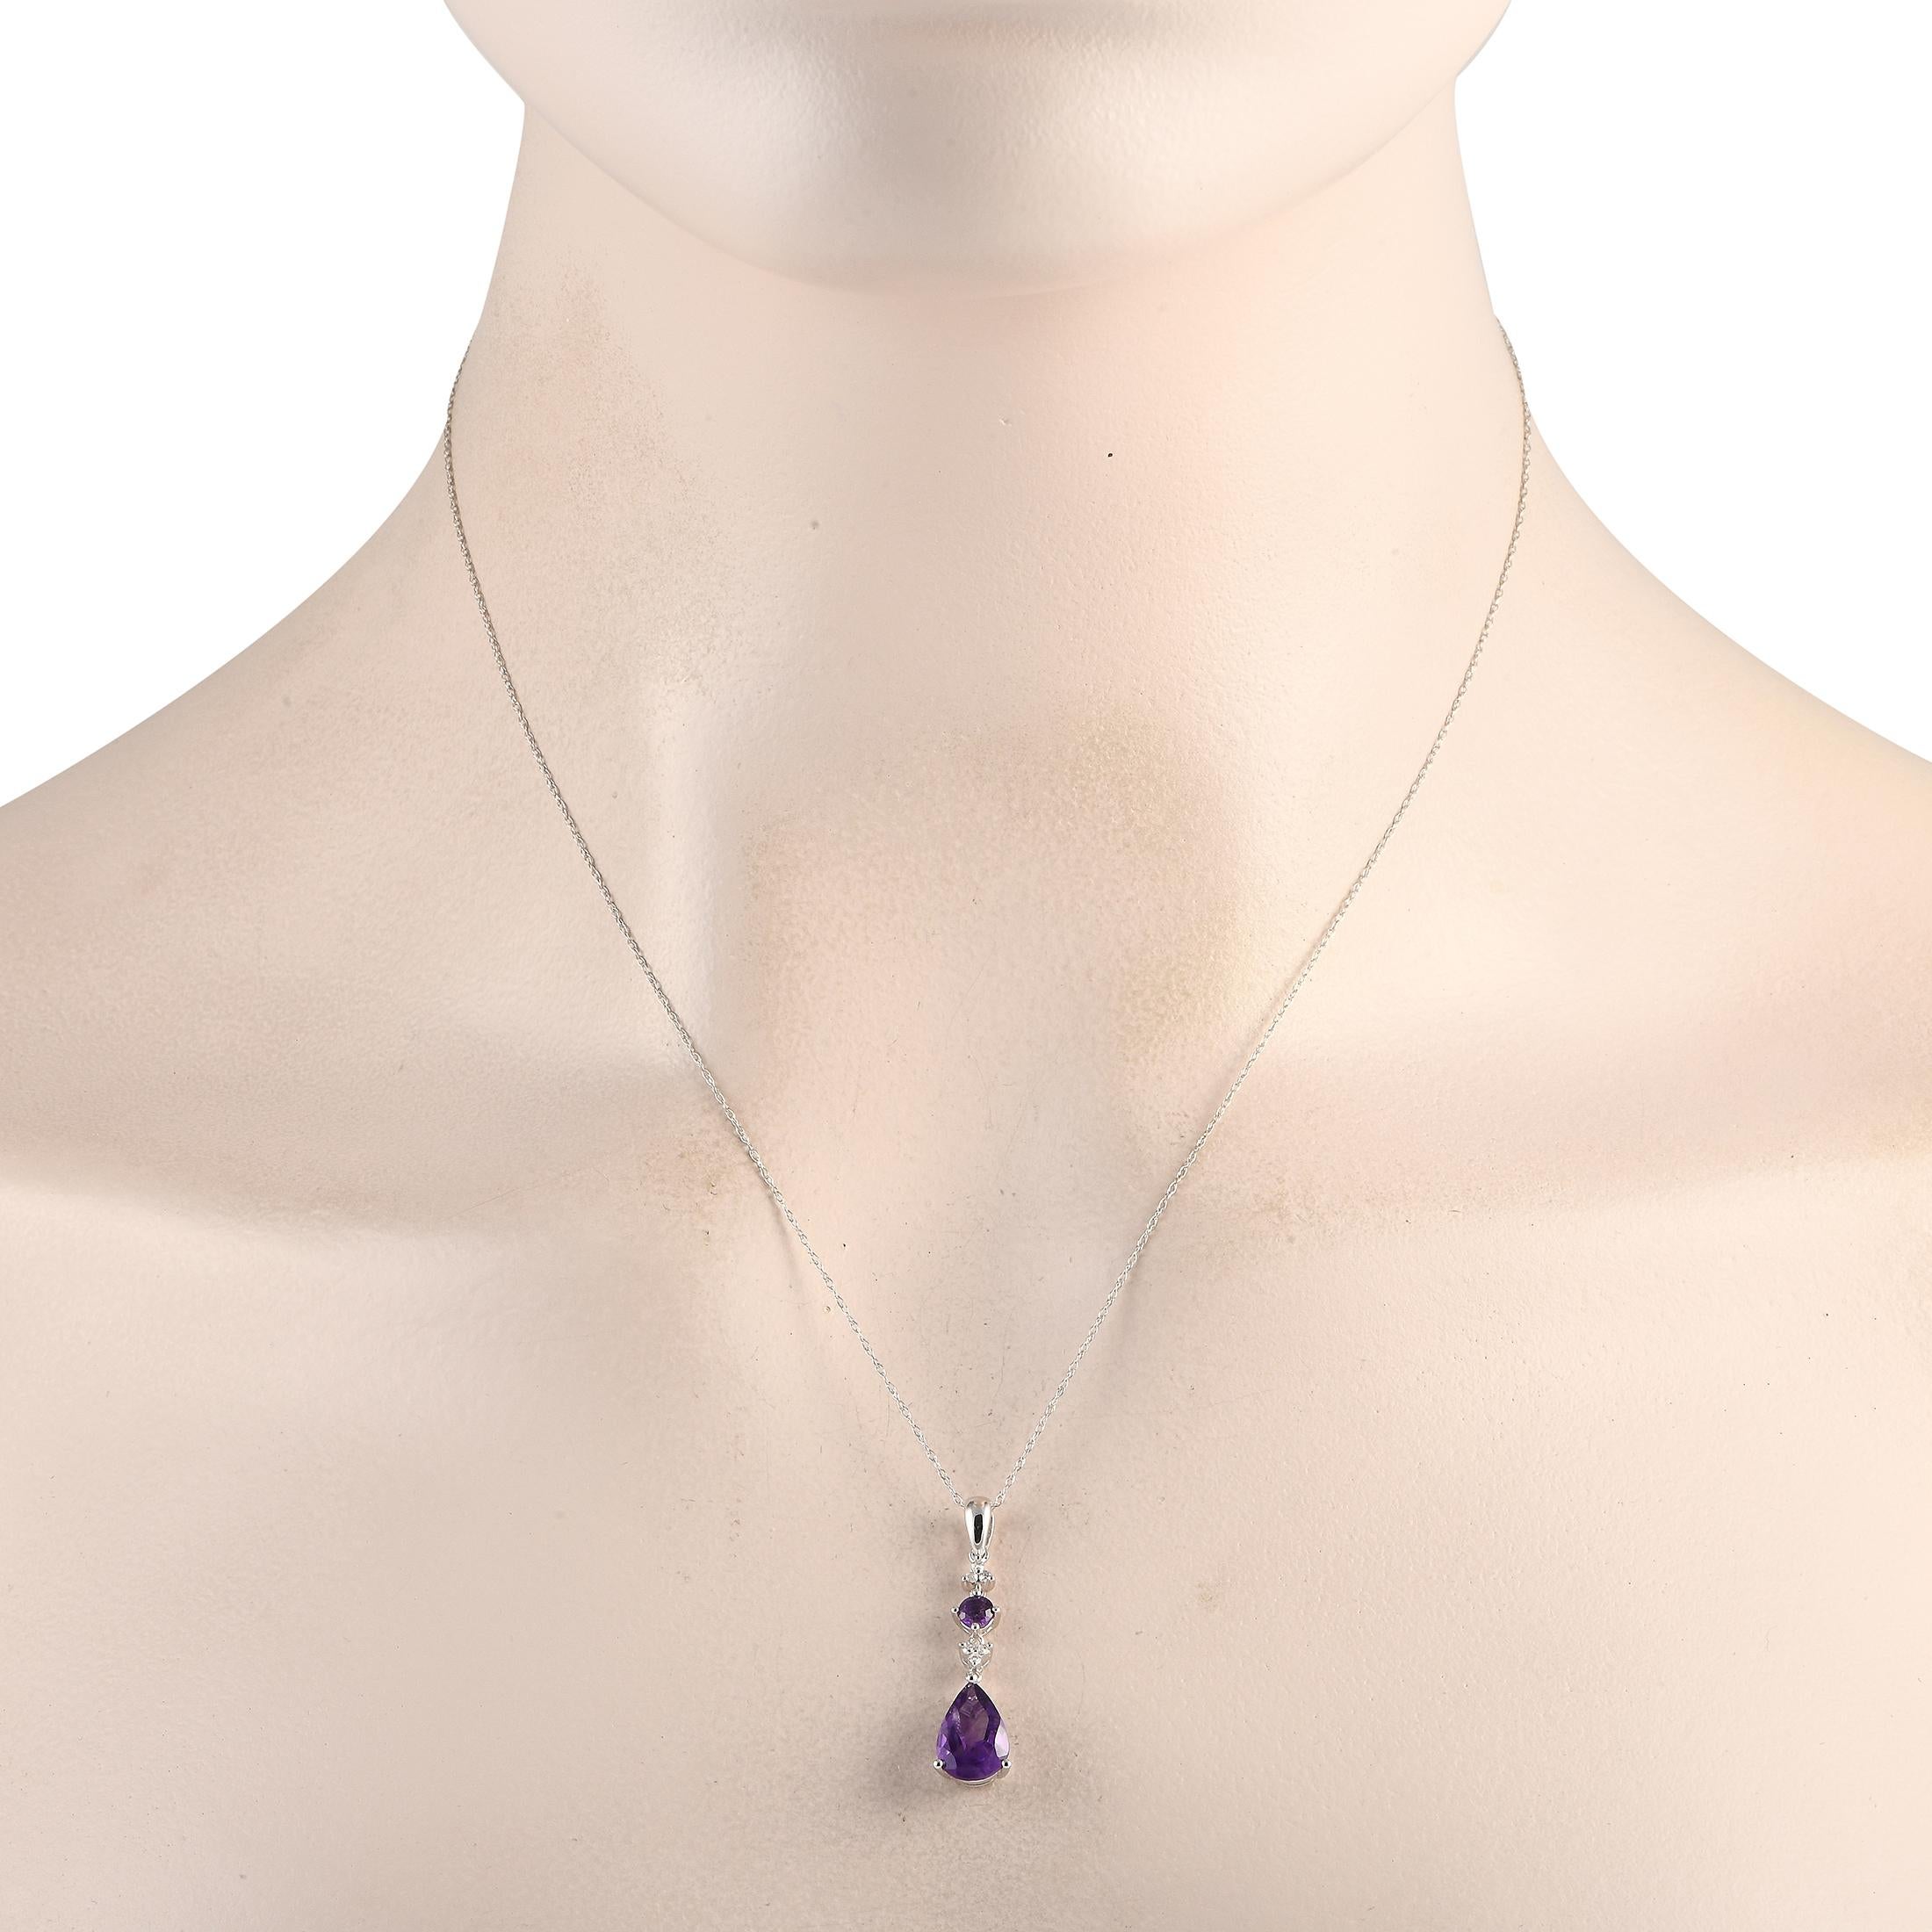 A pair of amethyst gemstones add color and visual impact to this timeless necklace. Sleek and elegant in design, it features a 14K white gold pendant measuring 1.25 long by 0.25 wide suspended from an 18 chain. Diamonds with a total weight of 0.05